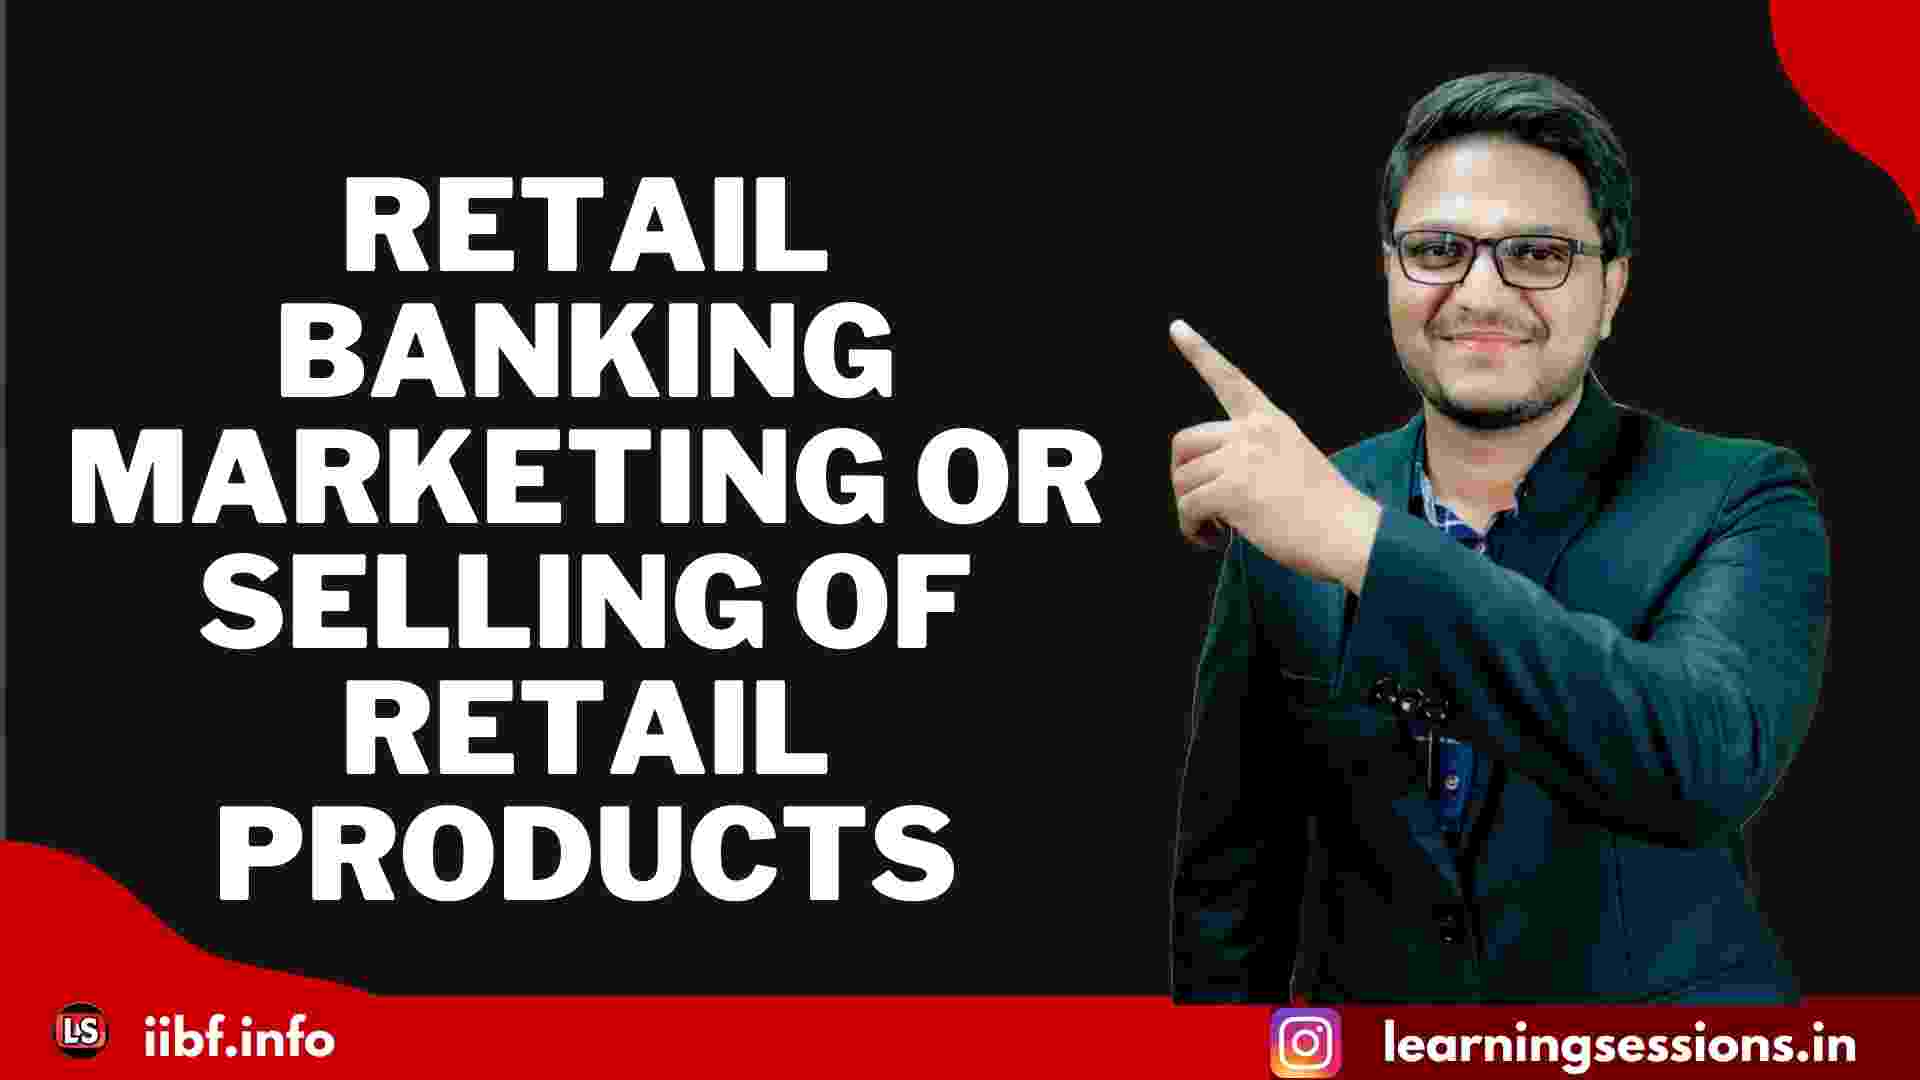 RETAIL BANKING | MARKETING OR SELLING OF RETAIL PRODUCTS